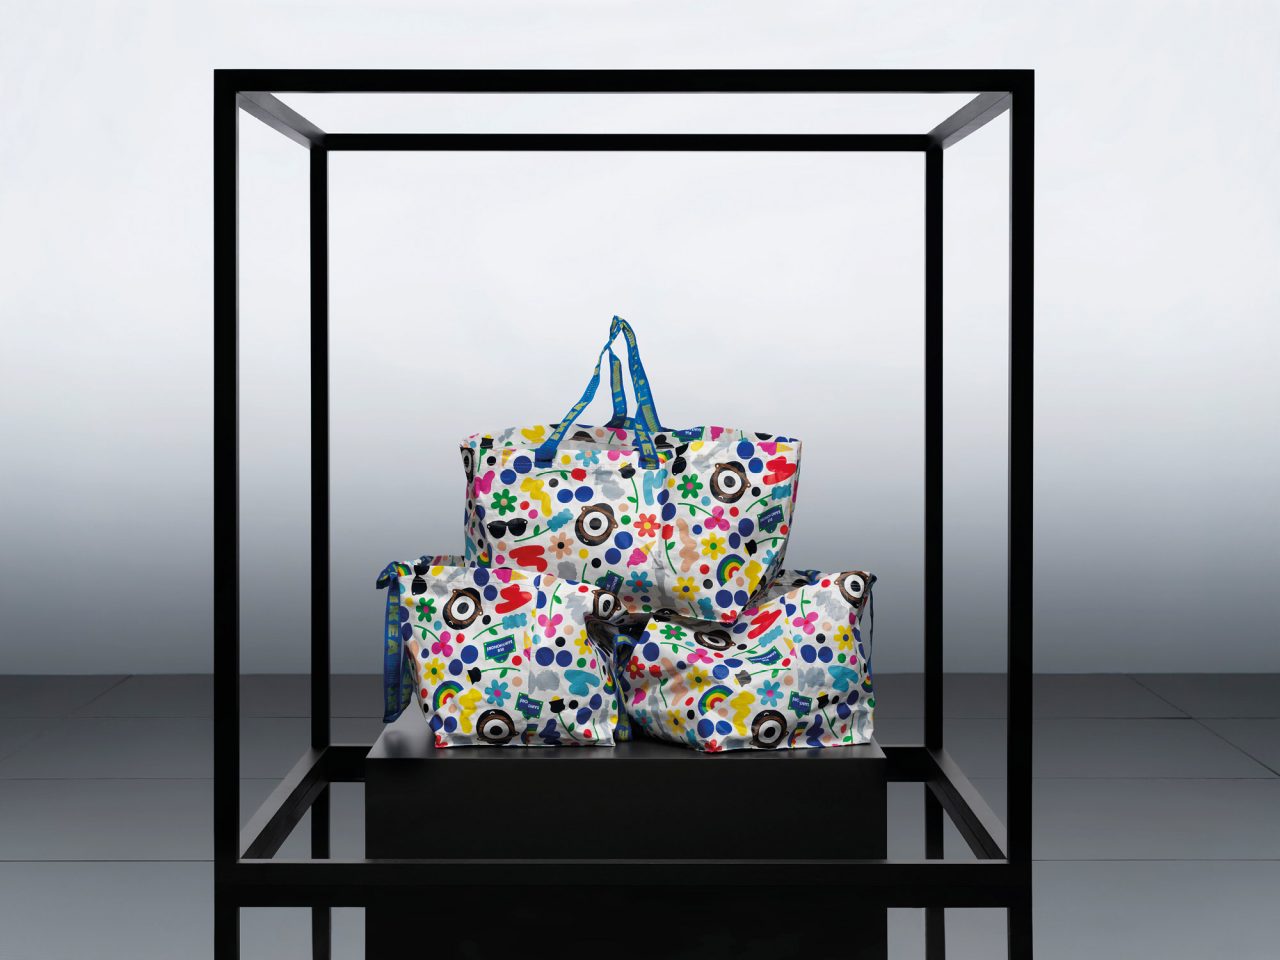 Three plastic tote bags of different sizes with a colourful pattern.